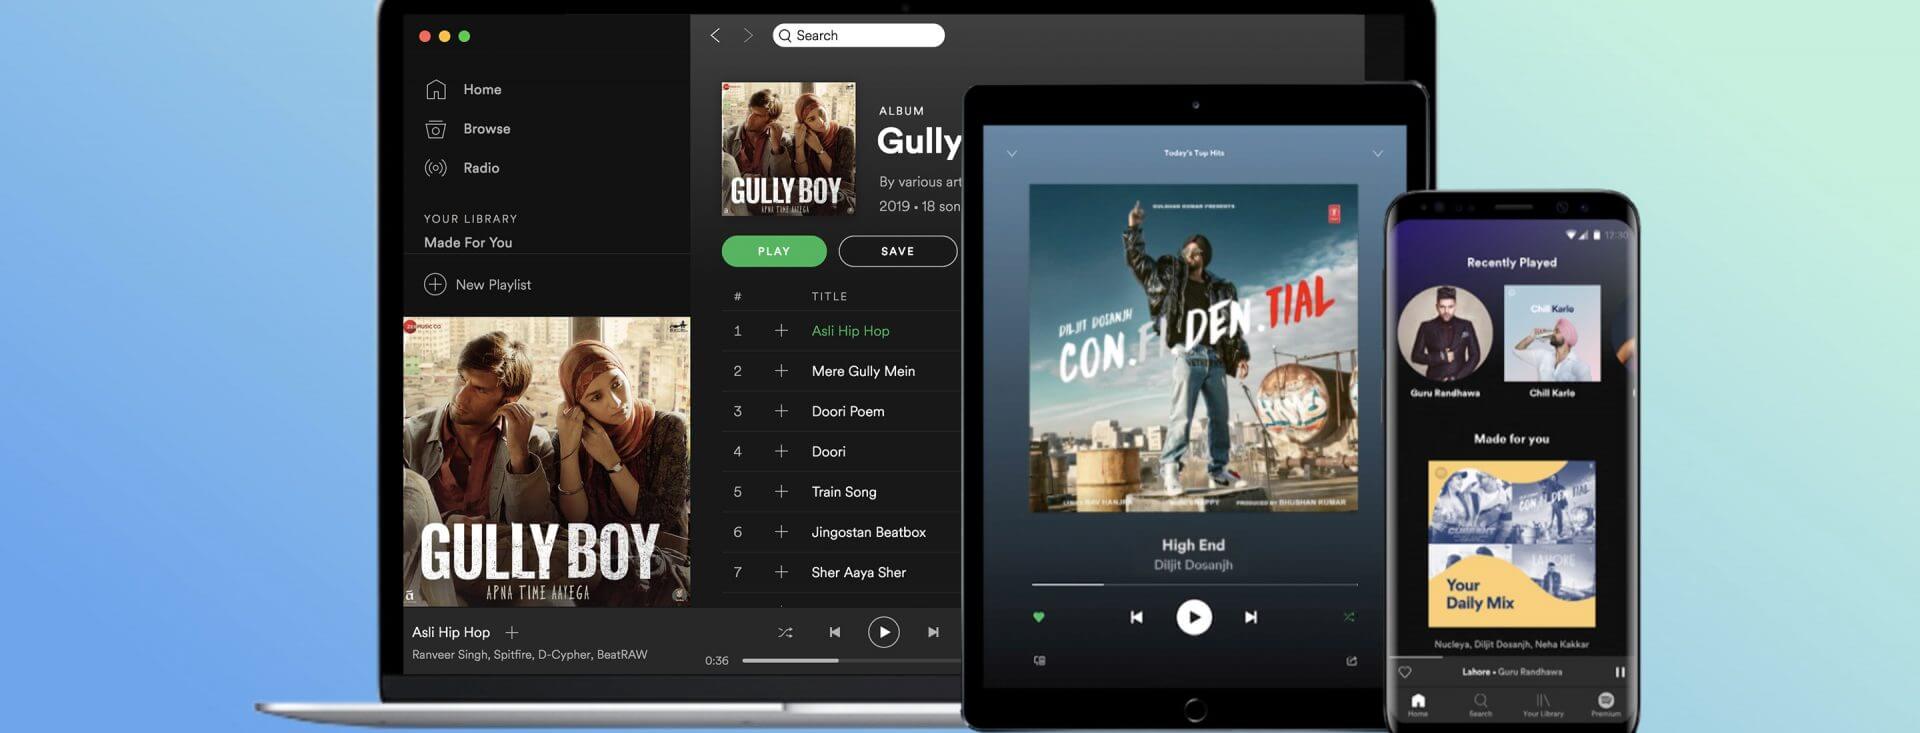 Spotify introduces listening restrictions for free users in India